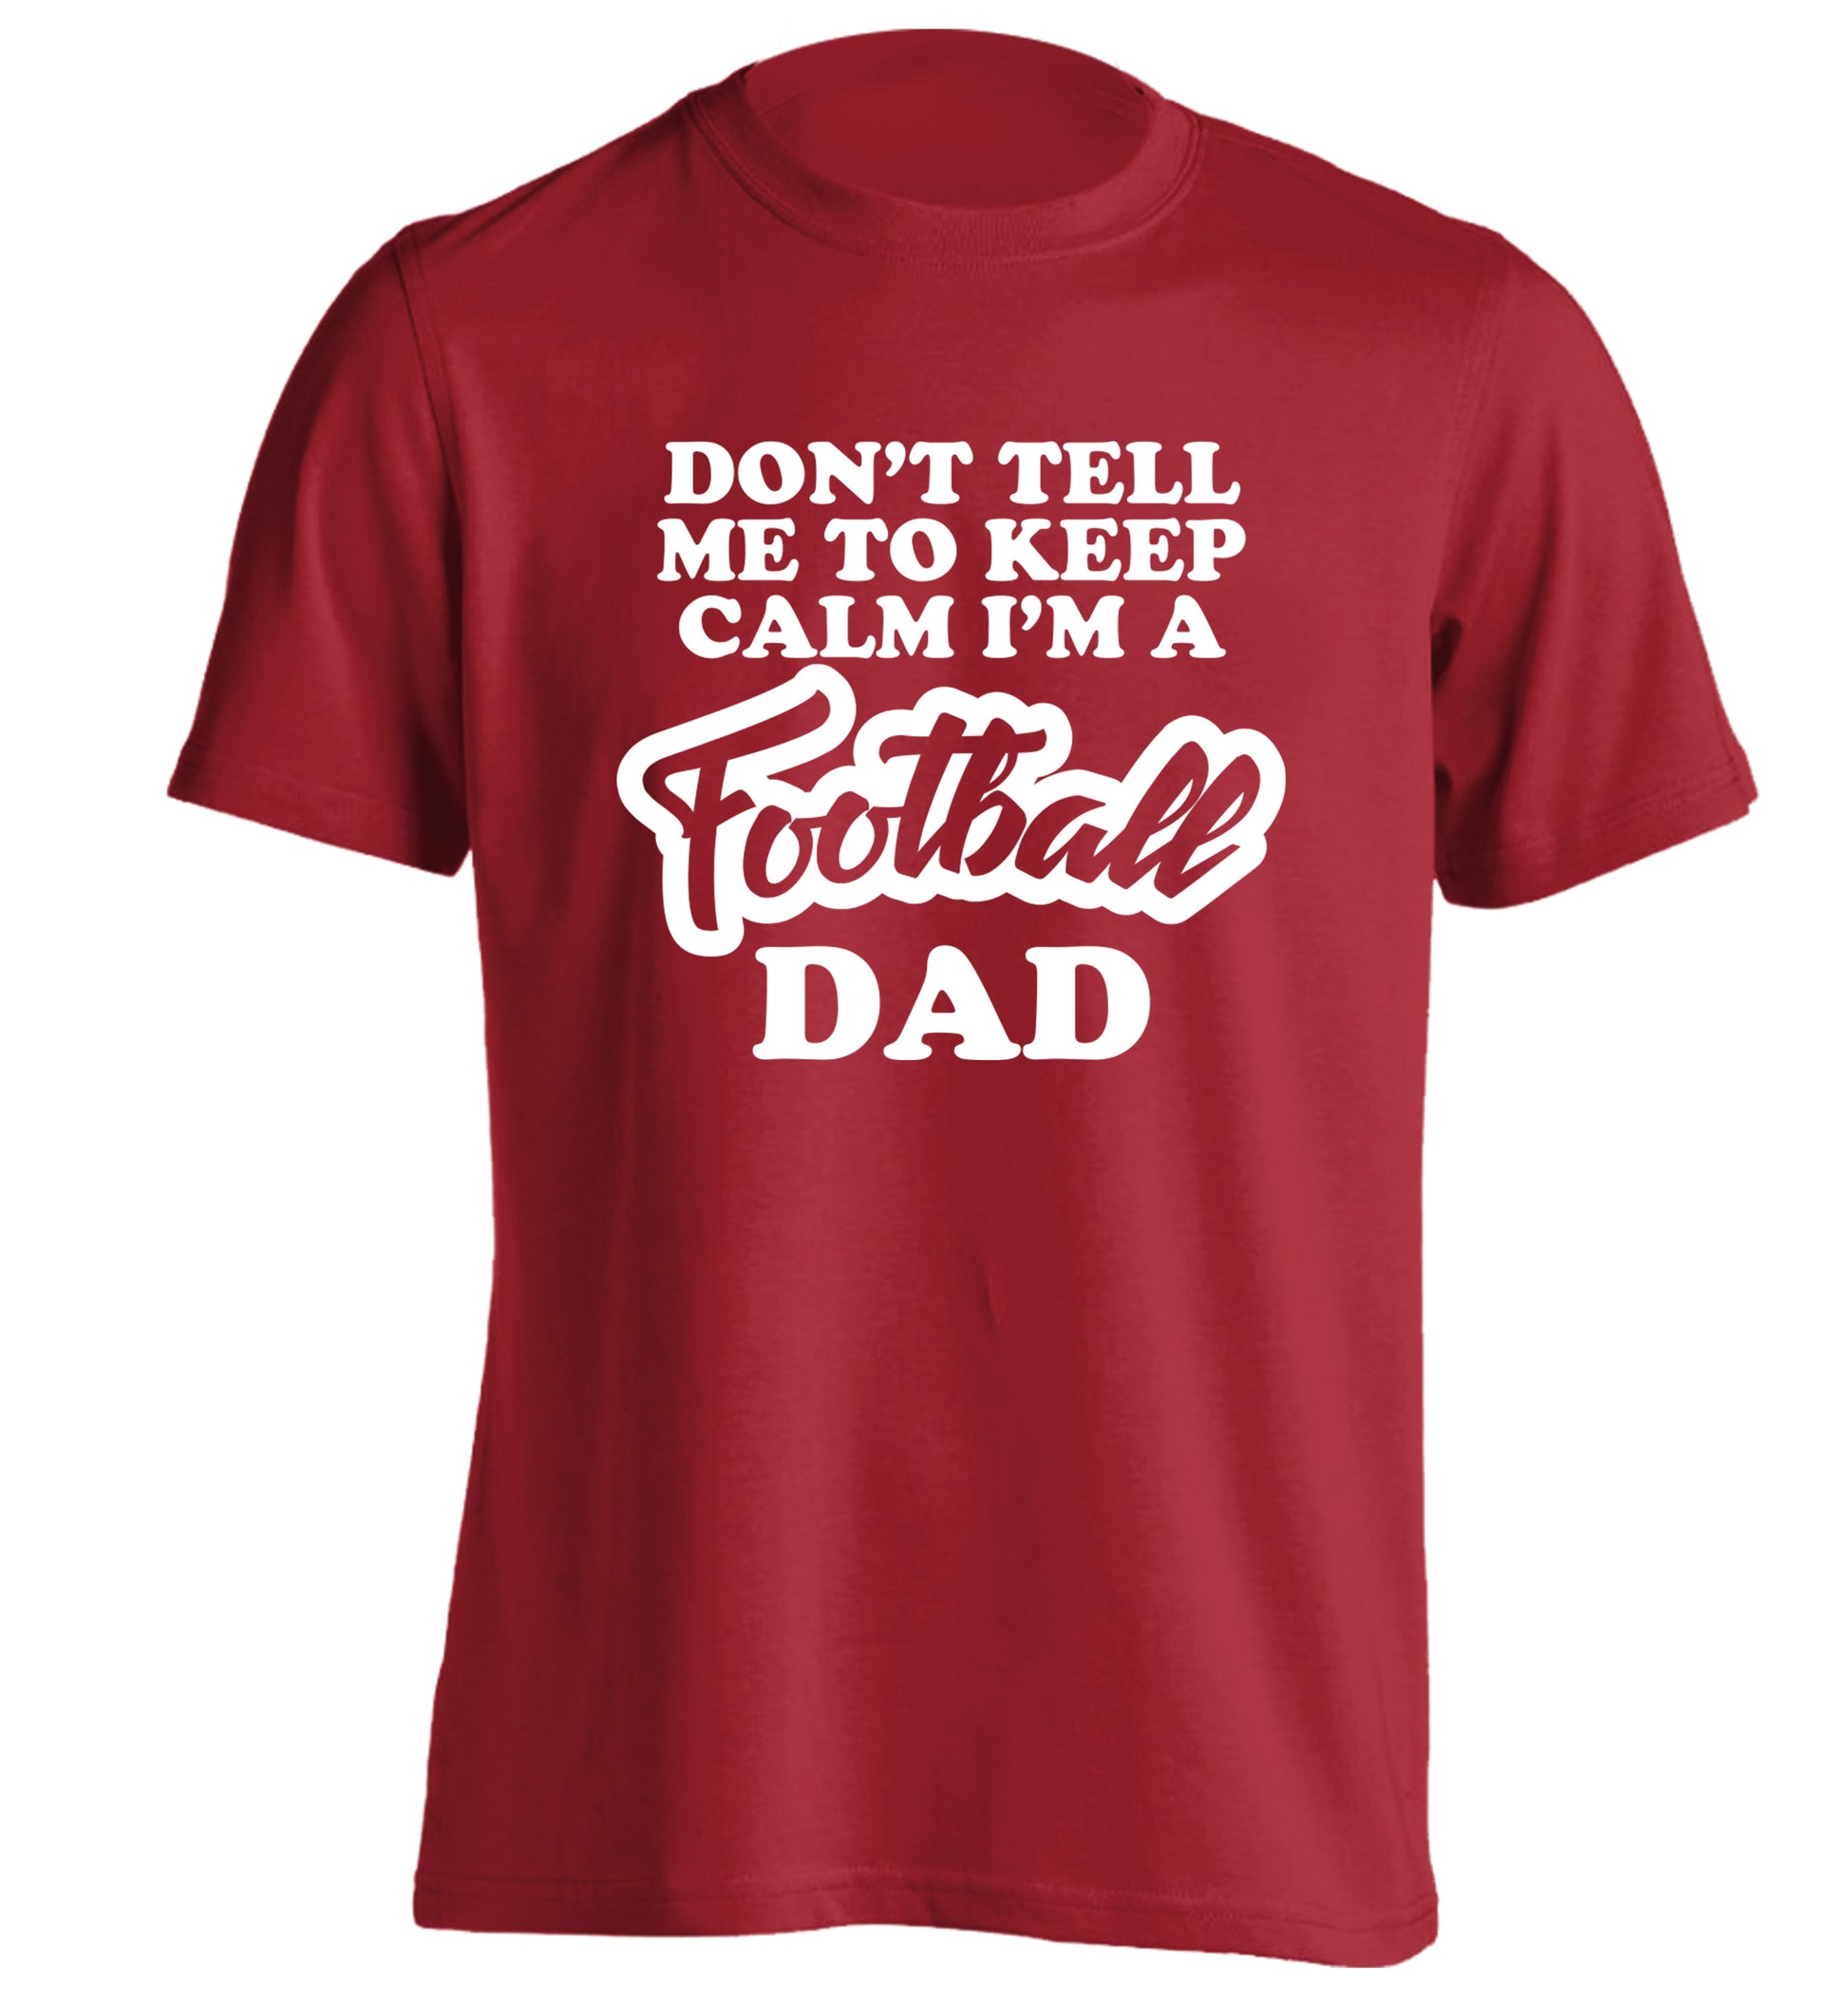 Don't tell me to keep calm I'm a football dad adults unisexred Tshirt 2XL